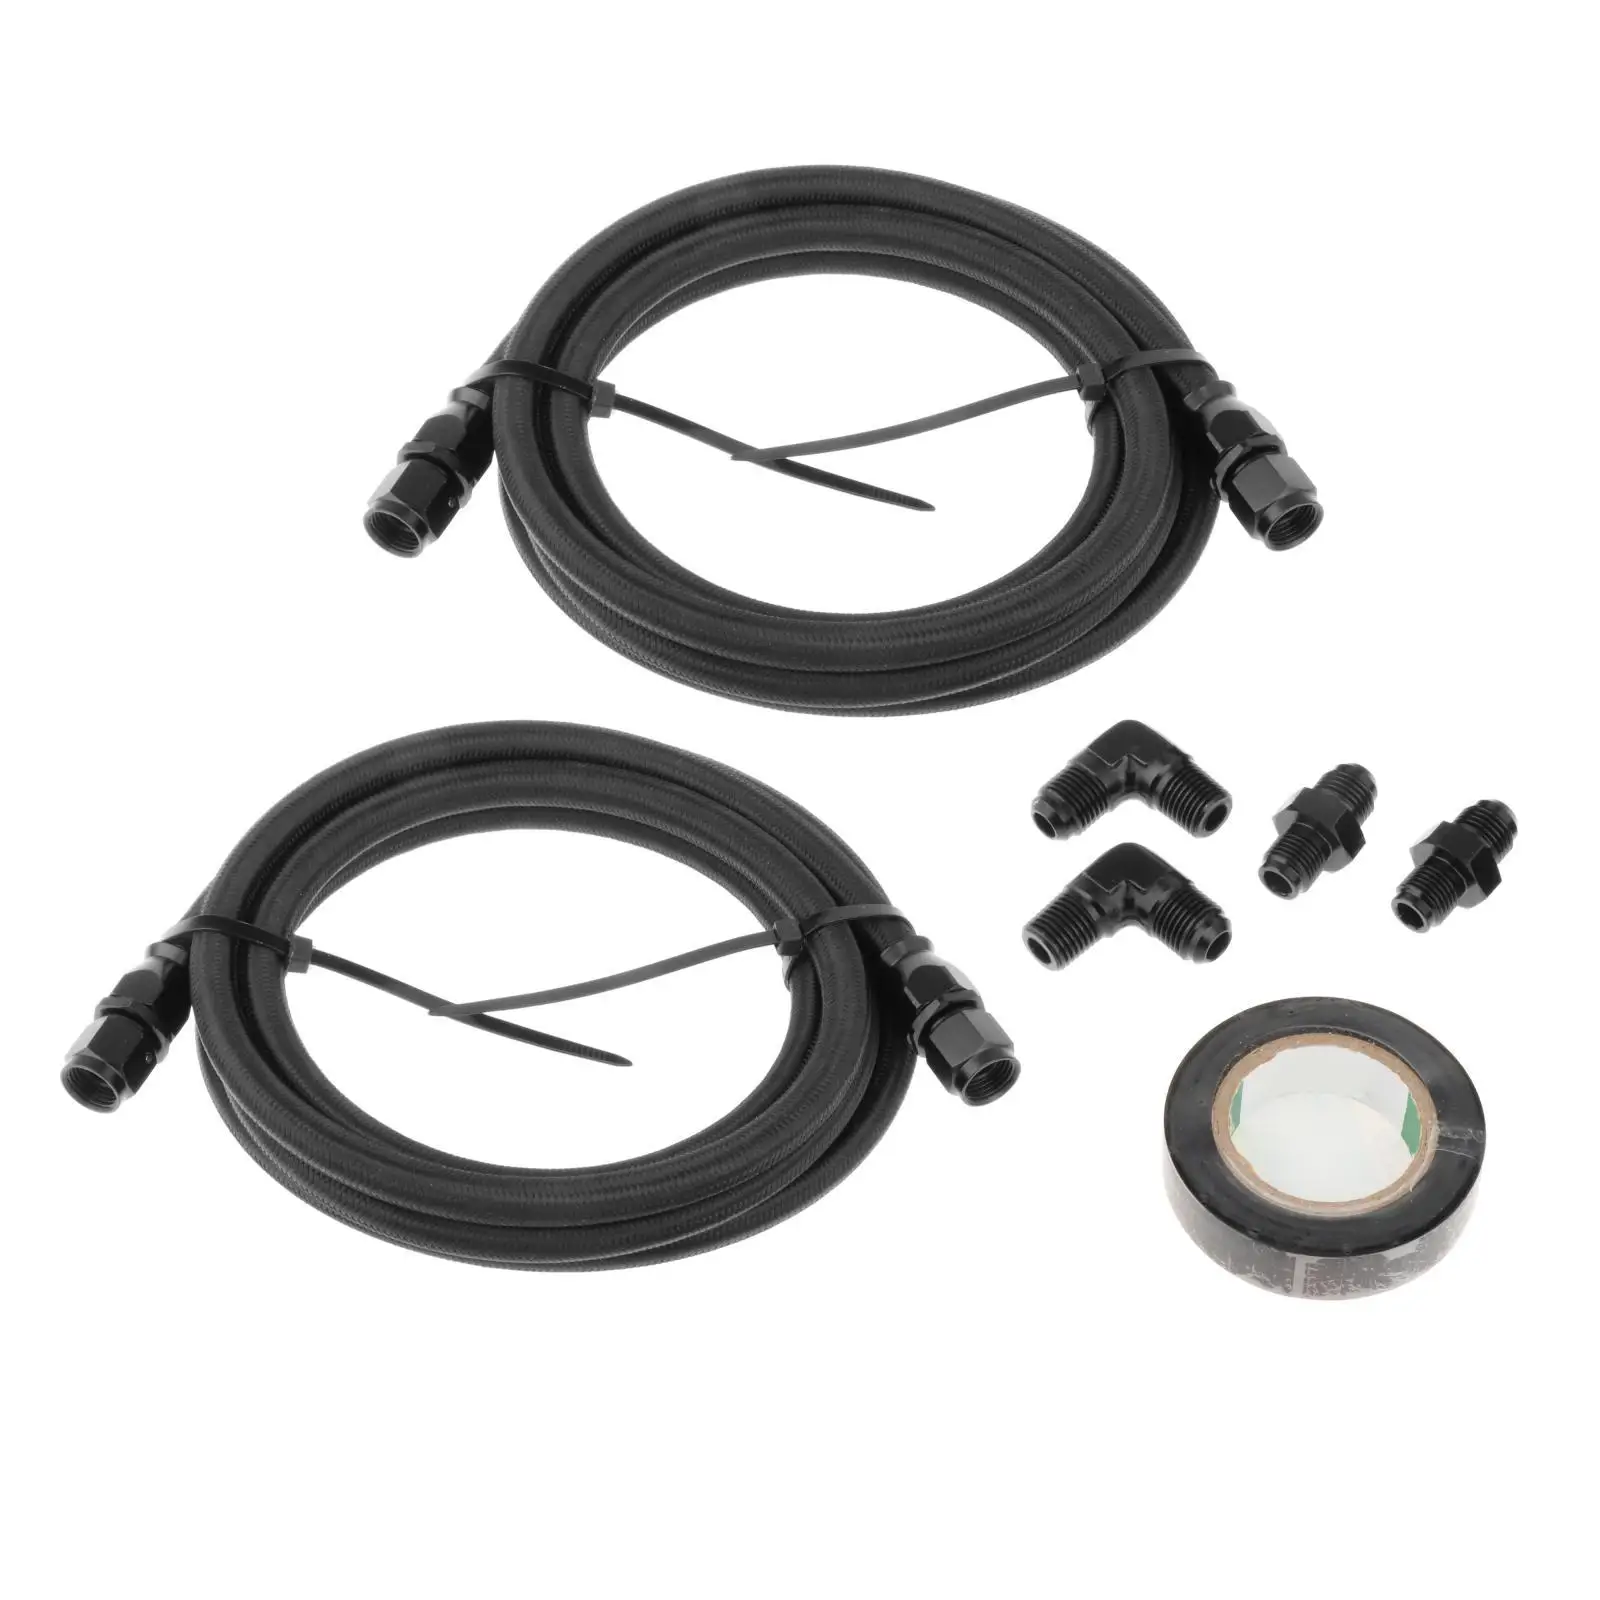 2 Pieces Transmission Cooler Hose Gas Cable Spare Parts with Fittings